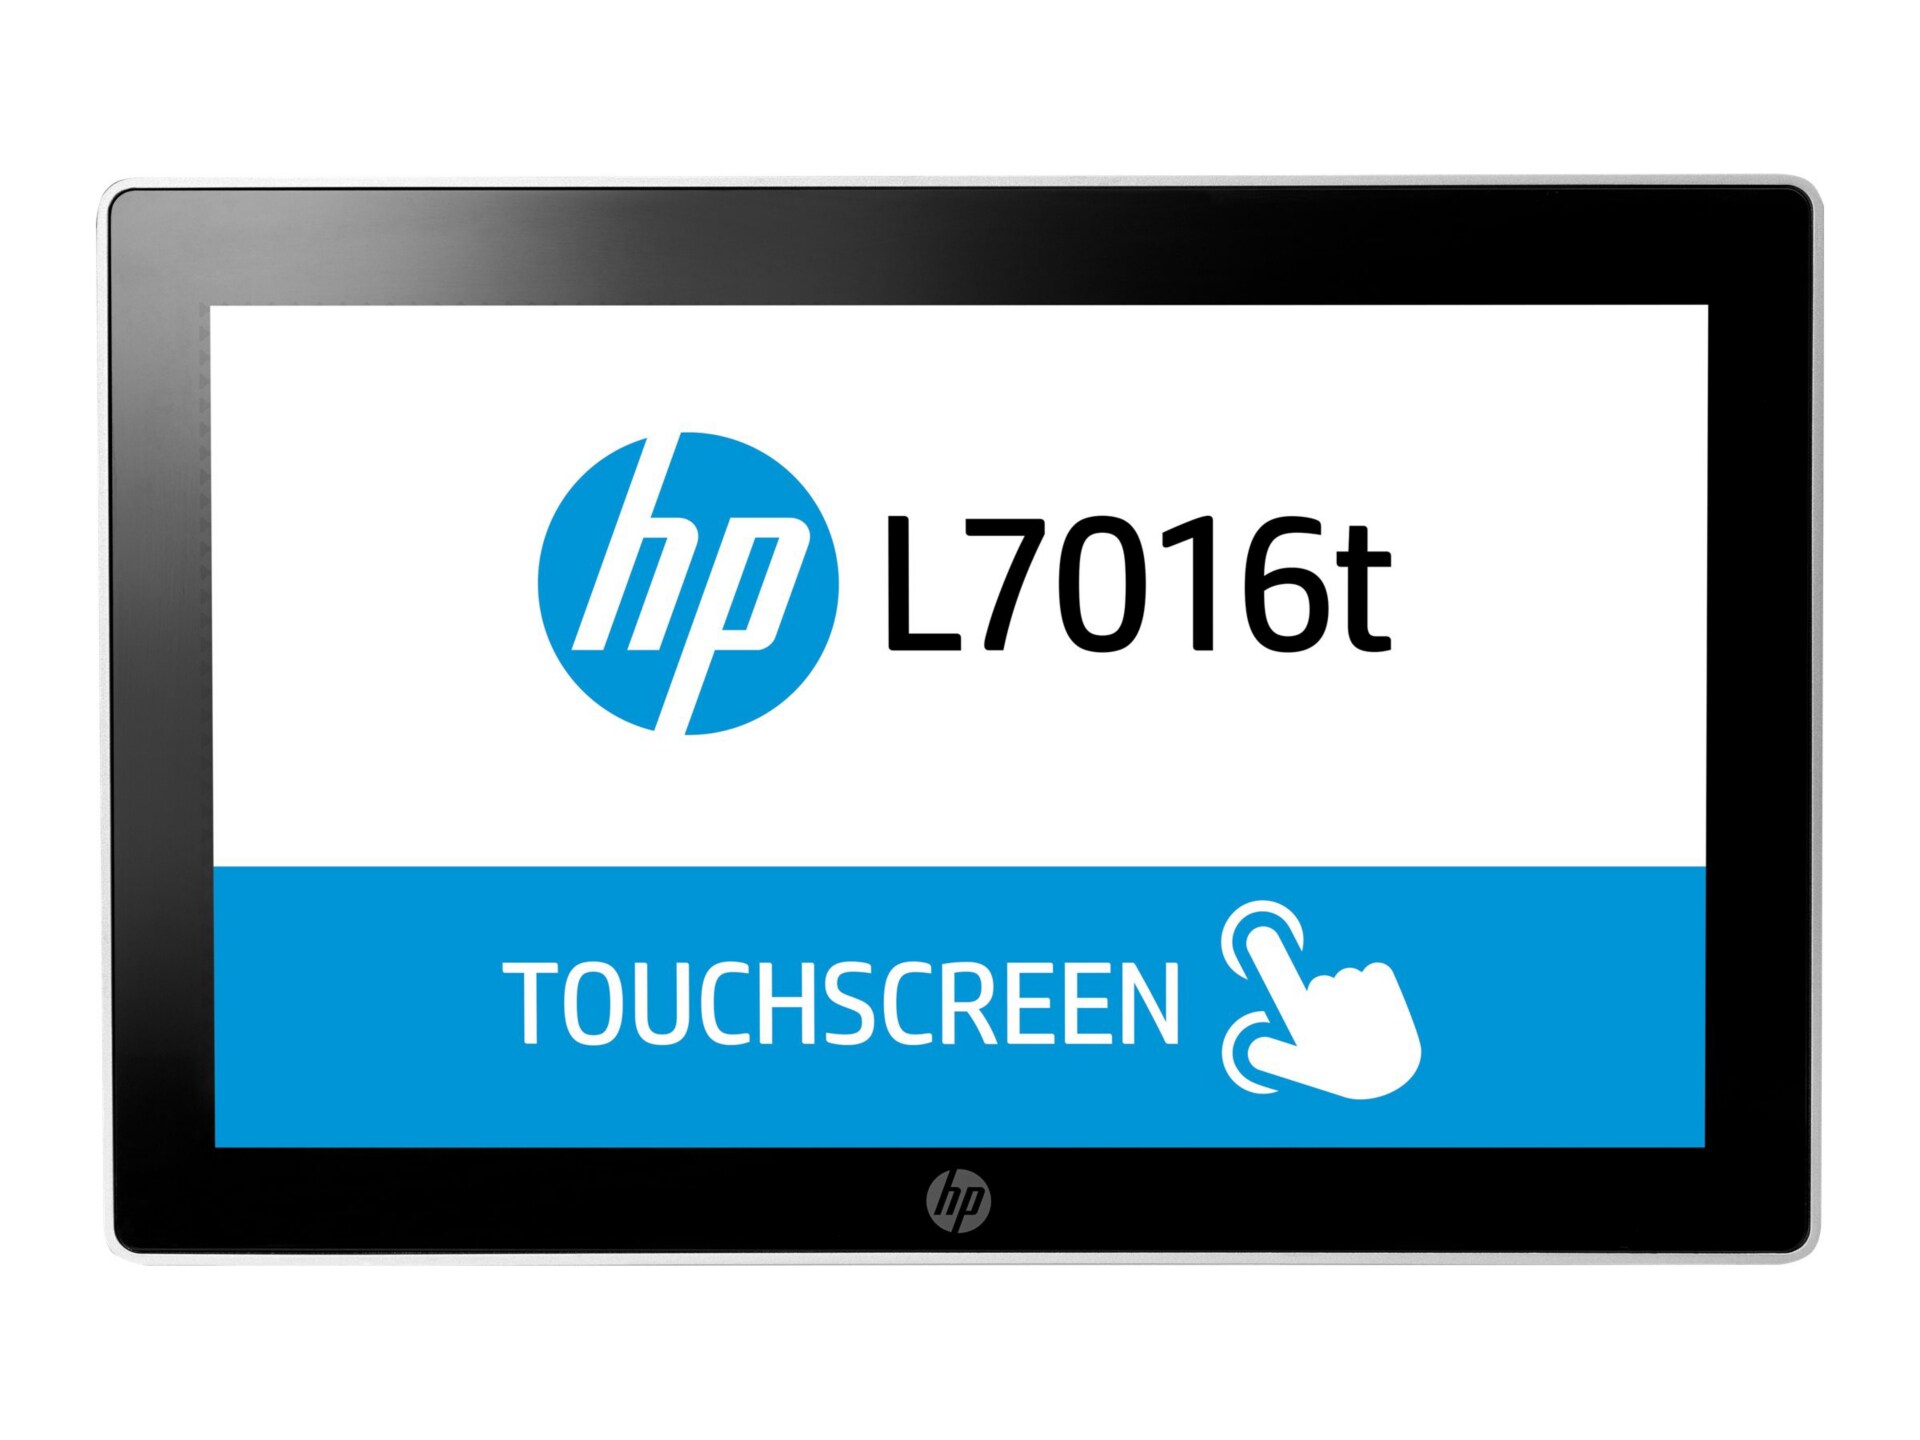 HP L7016t Retail Touch Monitor - LED monitor - 15.6" - Smart Buy